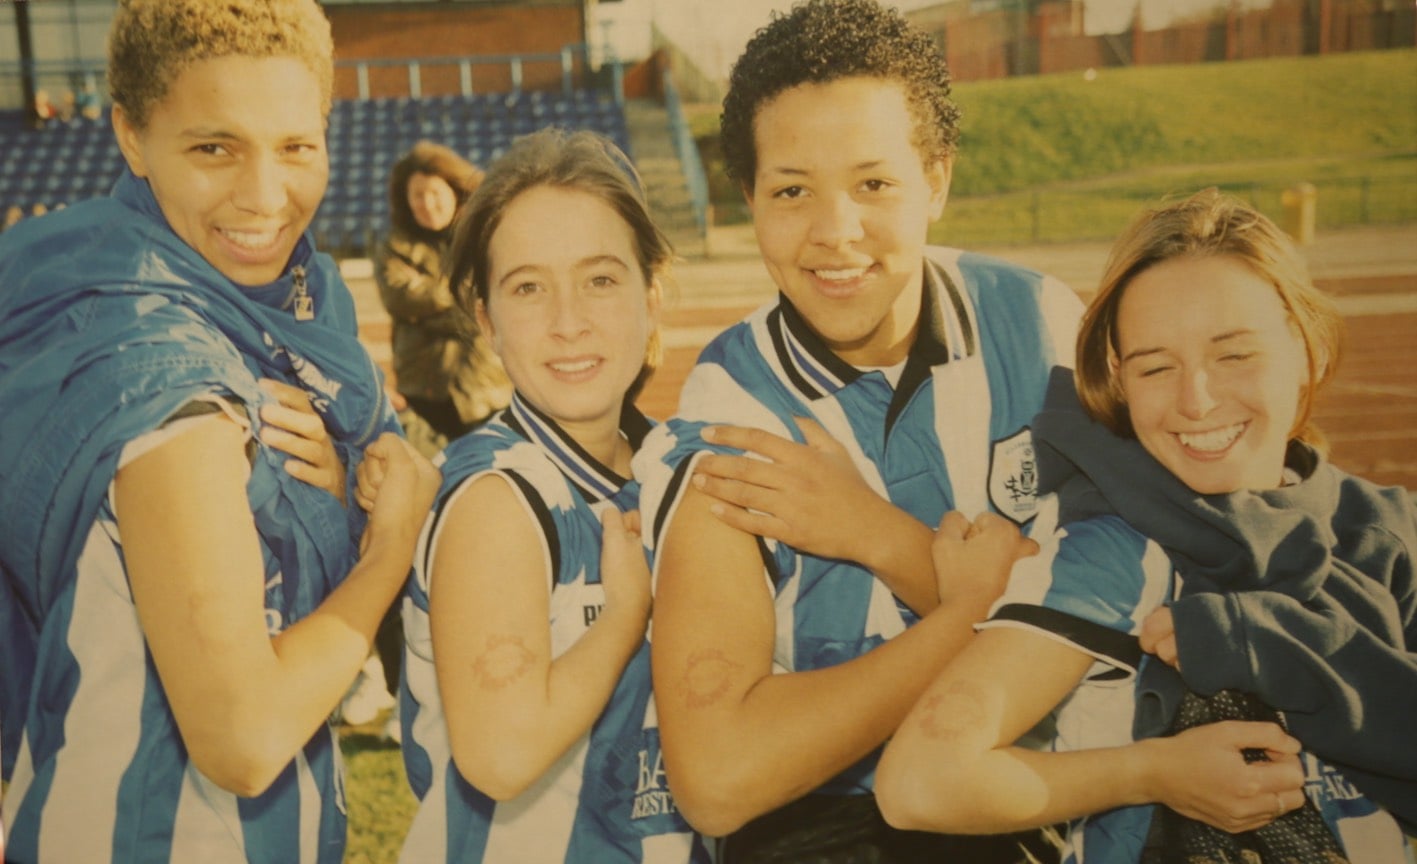 Lisa Bailey, Fletch, Steph Spence and Kelly Biney - Left to right: Lisa Bailey, Michelle Fletcher, Steph Spence and Kelly Biney, late 1990s. Woodbourn Road, Sheffield.